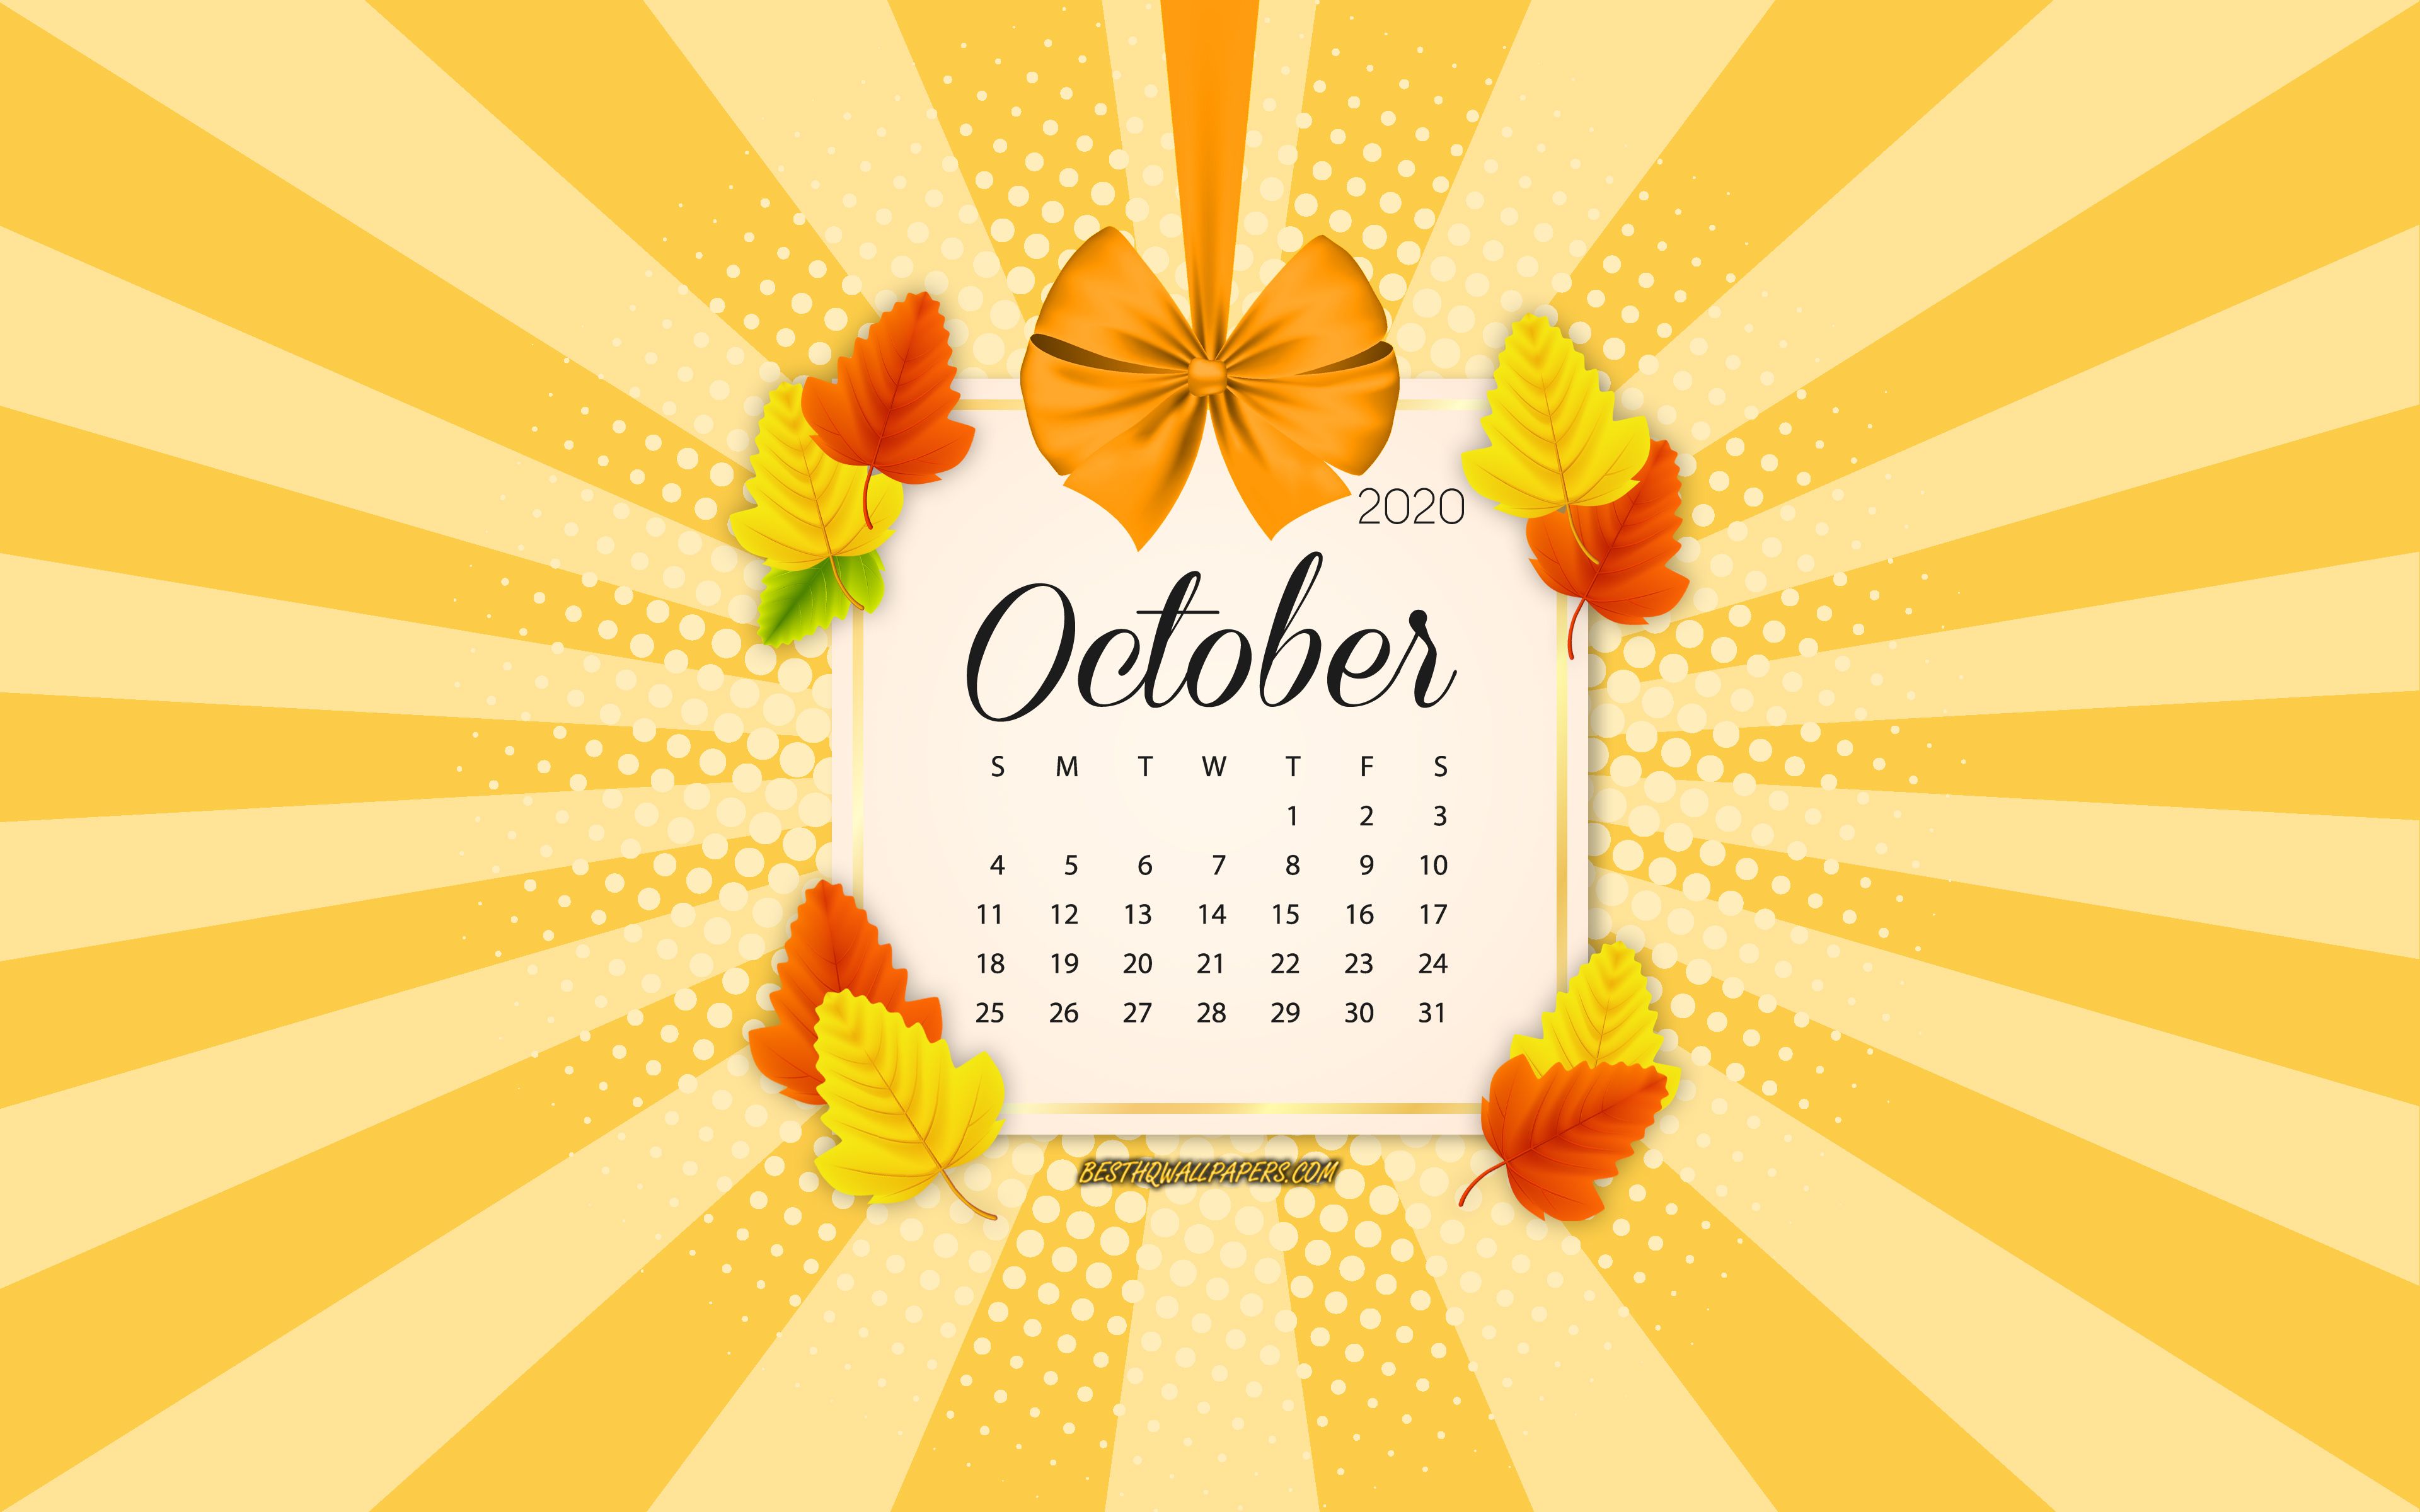 Download wallpaper 2020 October Calendar, orange background, autumn 2020 calendars, October, 2020 calendars, autumn leaves, retro style, October 2020 Calendar, calendar with leaves for desktop with resolution 3840x2400. High Quality HD picture wallpaper